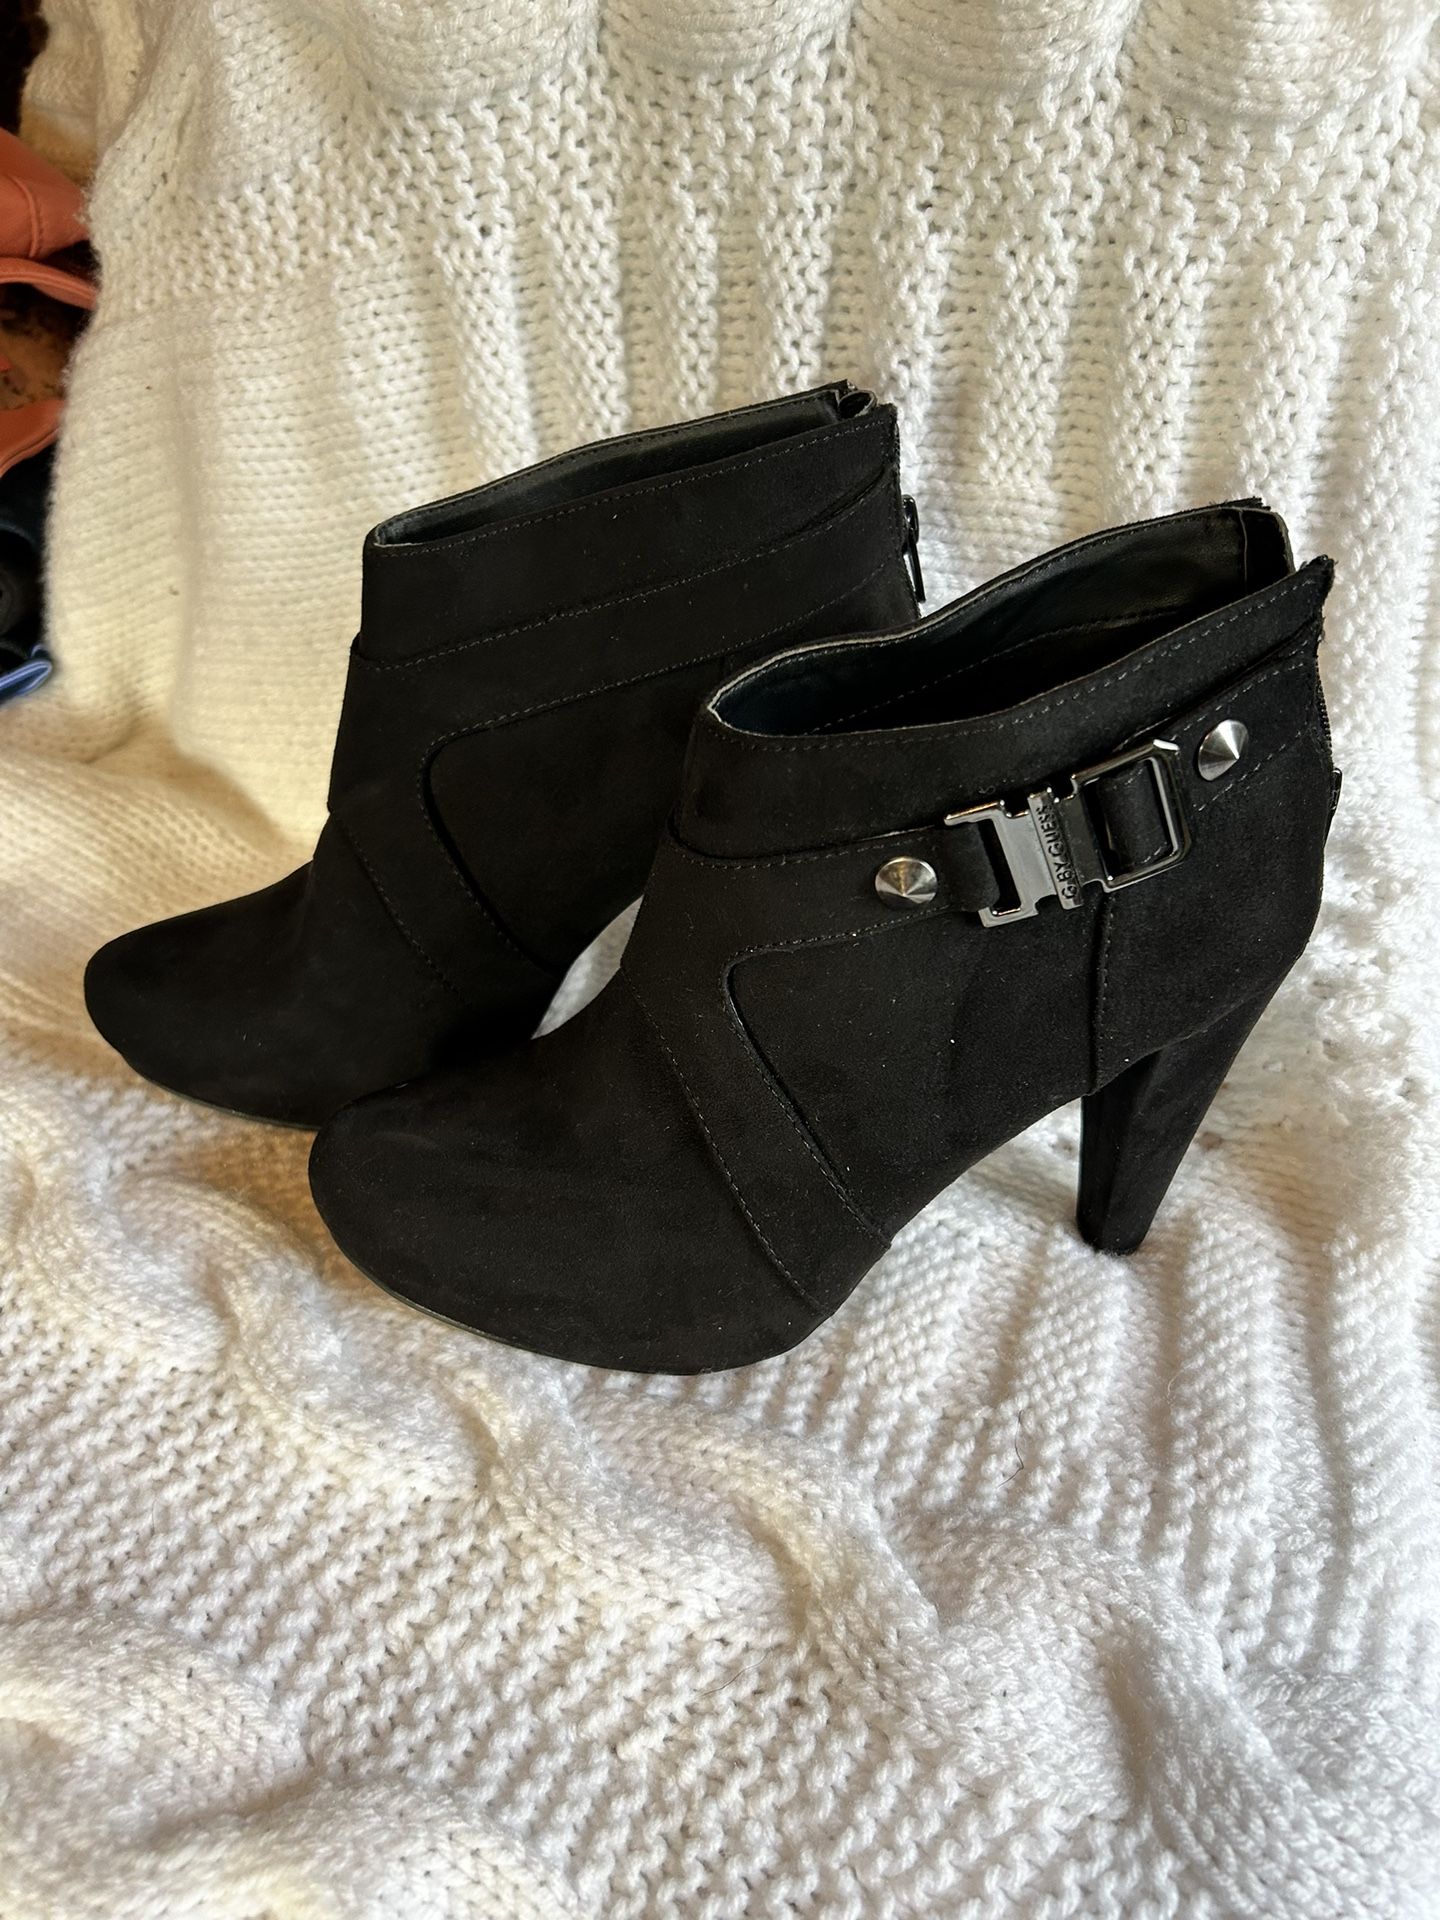 GUESS Booties Brand new Sz 7 1/2